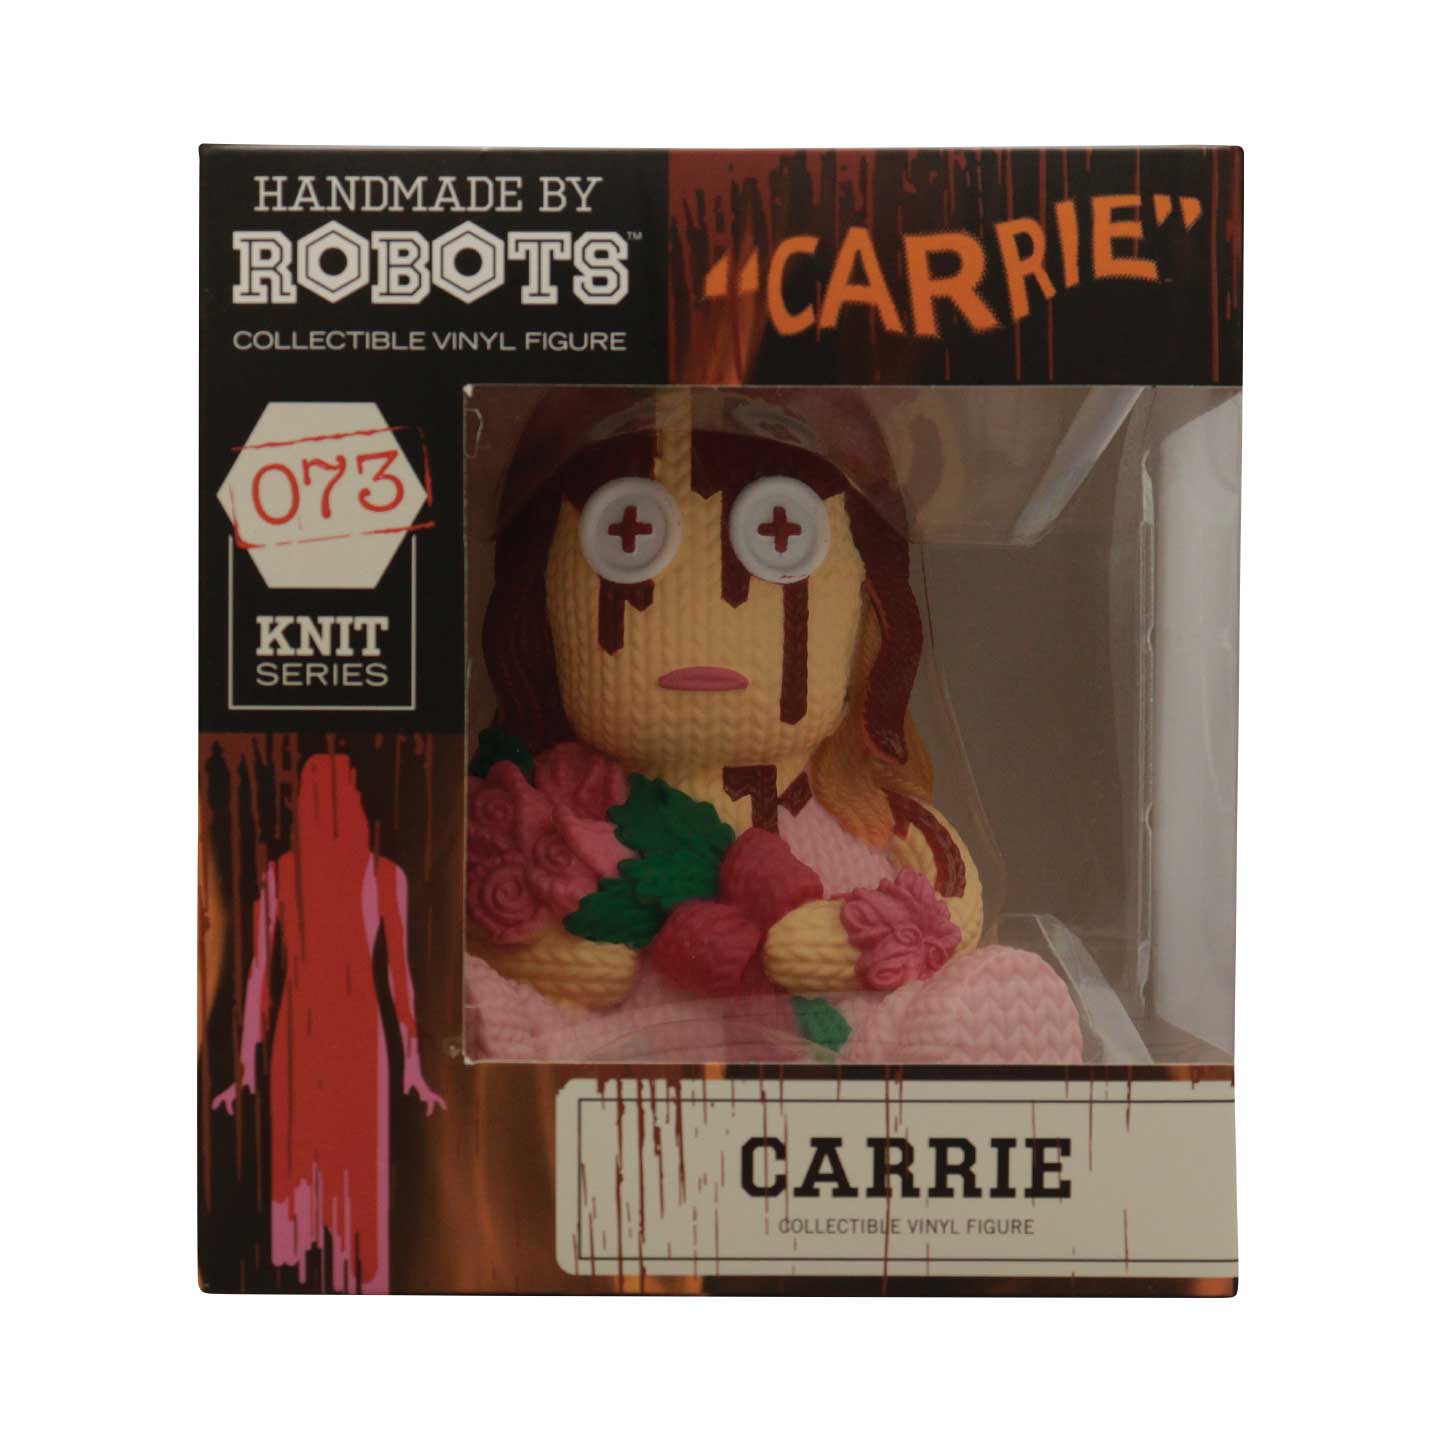 Carrie Collectible Vinyl Figure from Handmade by Robots